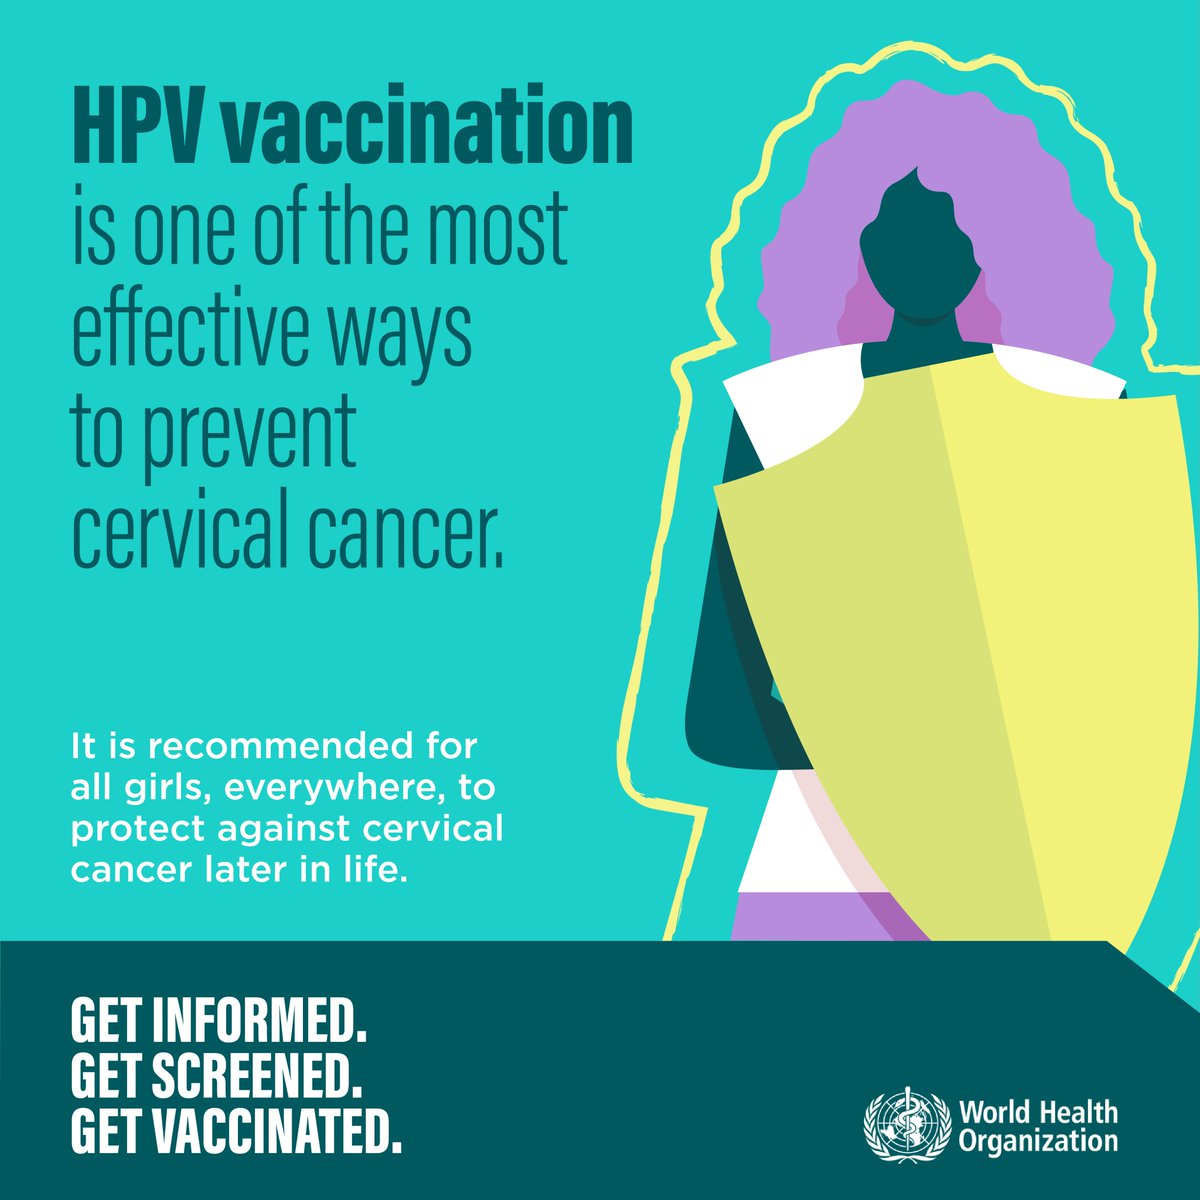 Prophylactic vaccination against the human papillomavirus (HPV) and screening and treatment of pre-cancer lesions are effective ways to prevent #cervicalcancer and are very cost-effective.